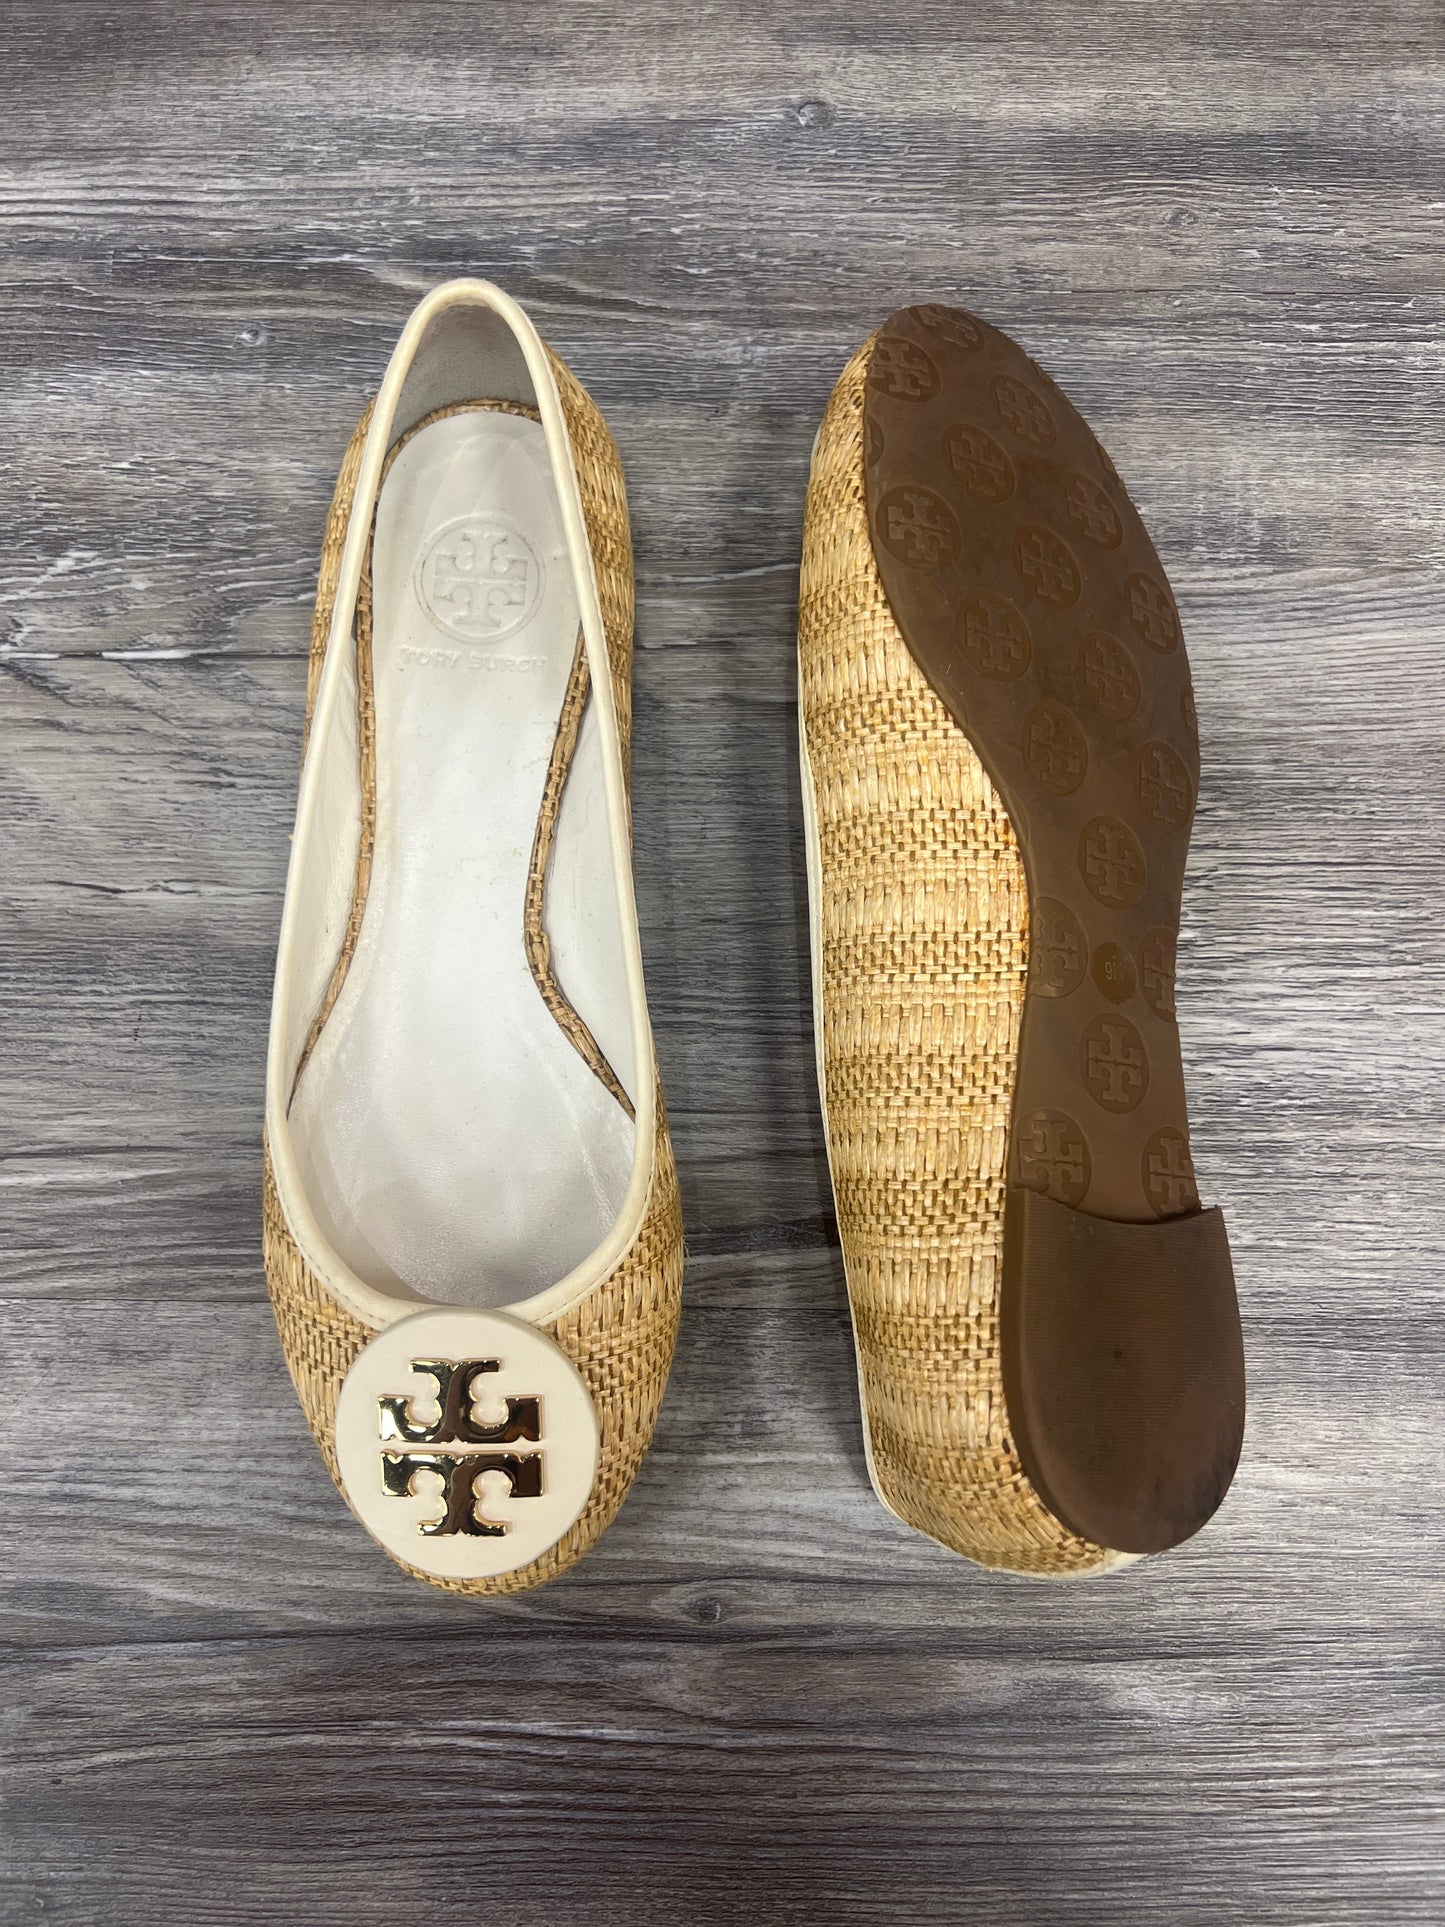 Sandals Designer By Tory Burch  Size: 10.5